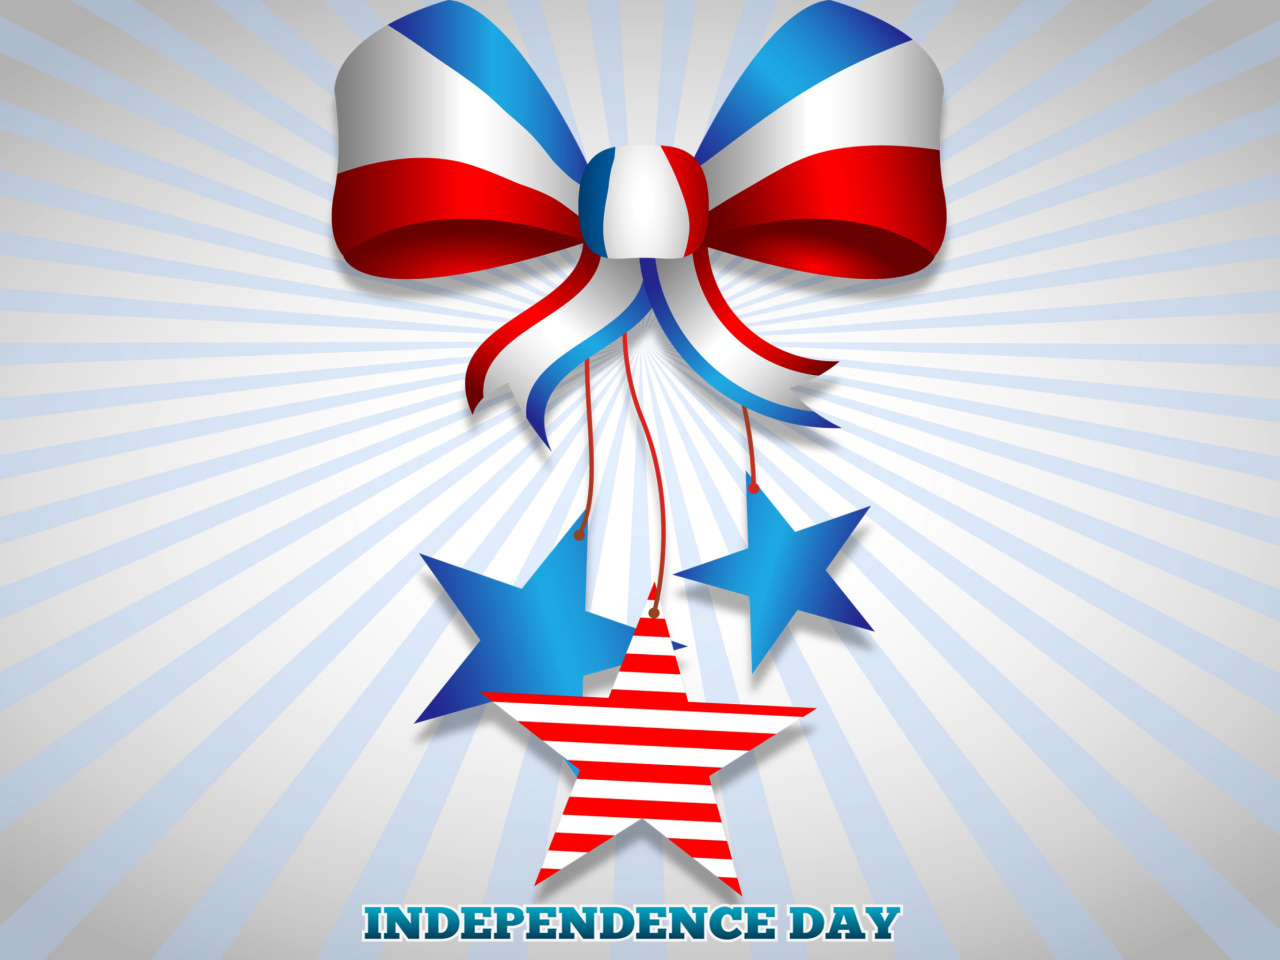 United states america Idependence day 4th july wallpaper 1280x960